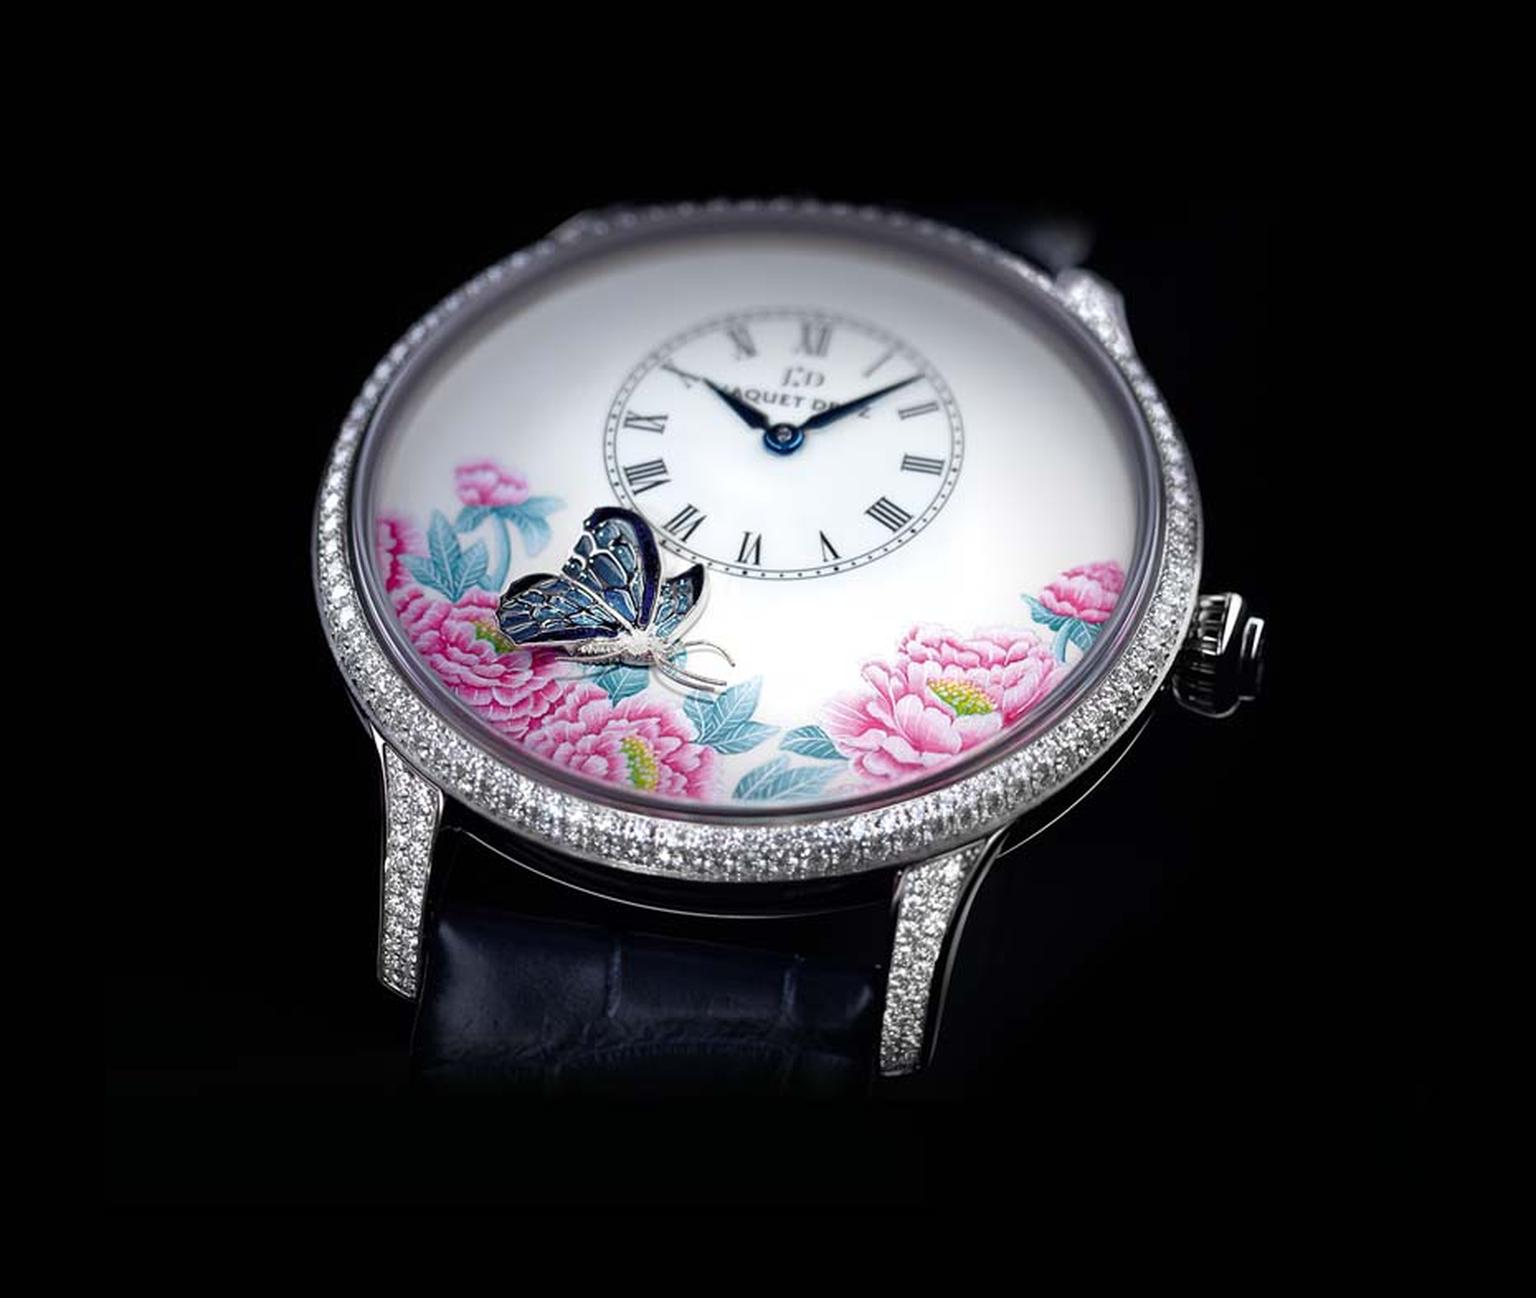 The Jaquet Droz watches in The Butterfly Journey collection are housed in Petite Heure Minute models. The enamelled wings of the butterfly and the realistic rendering of its sculpted body are frozen for eternity on the dial protected by a white gold case 